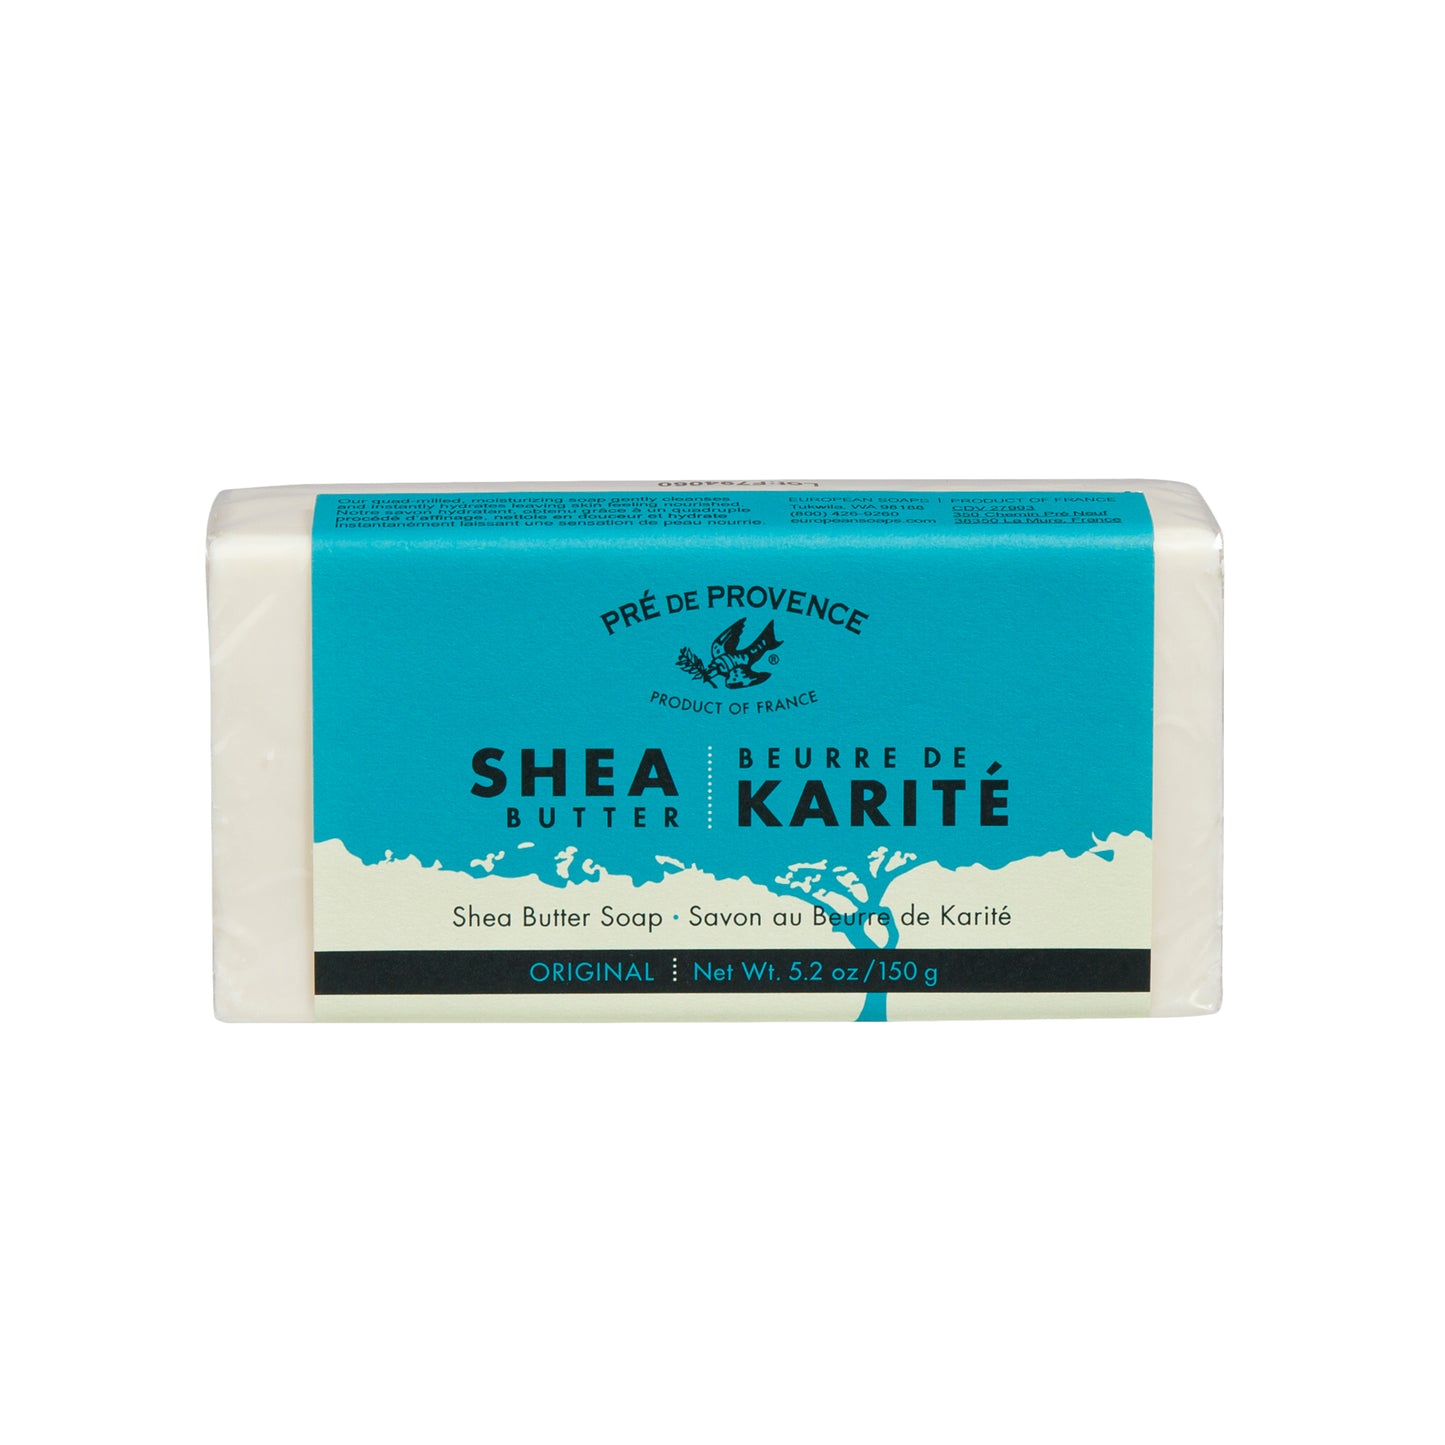 Primary Image of Shea Butter Hand Cut Soap